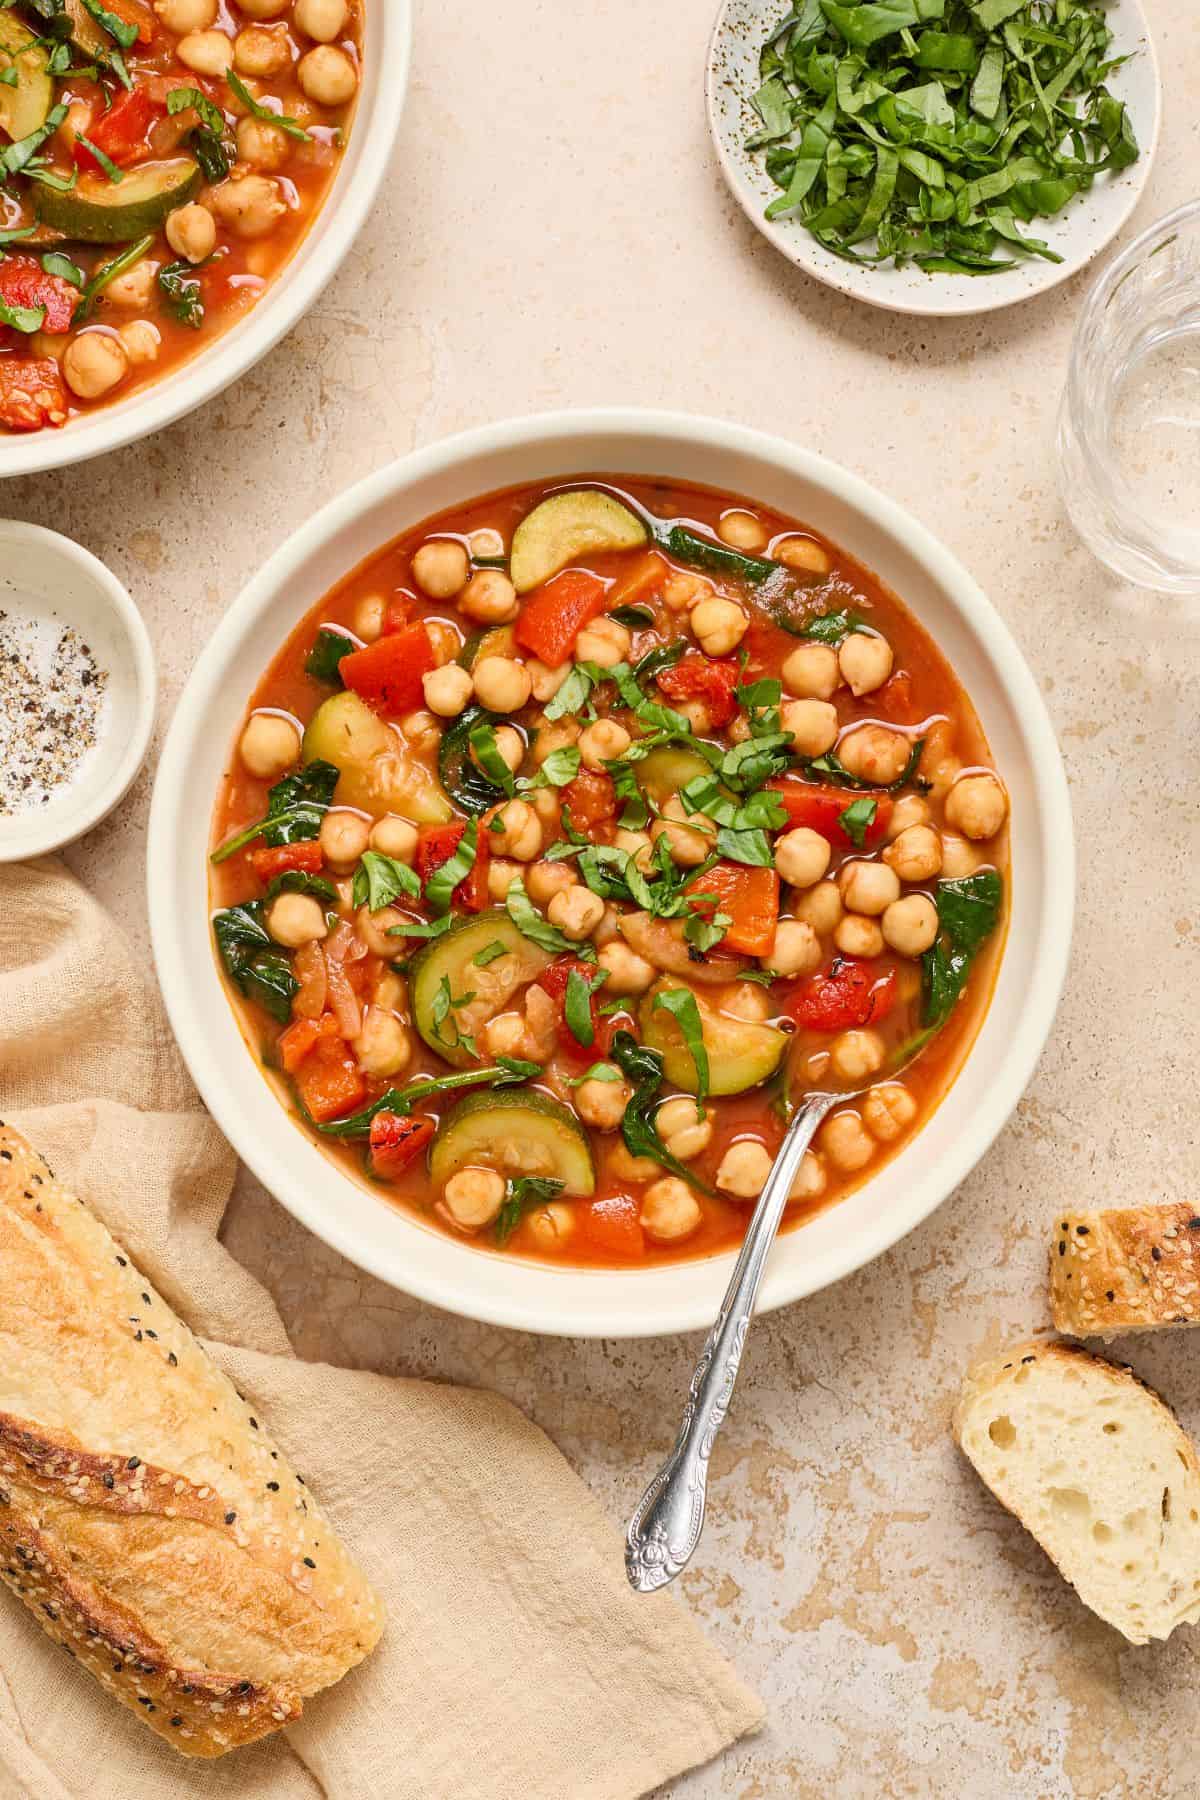 Two round white bowls of Chickpea and Zucchini Stew, one with a spoon resting in it, garnished with fresh basil.